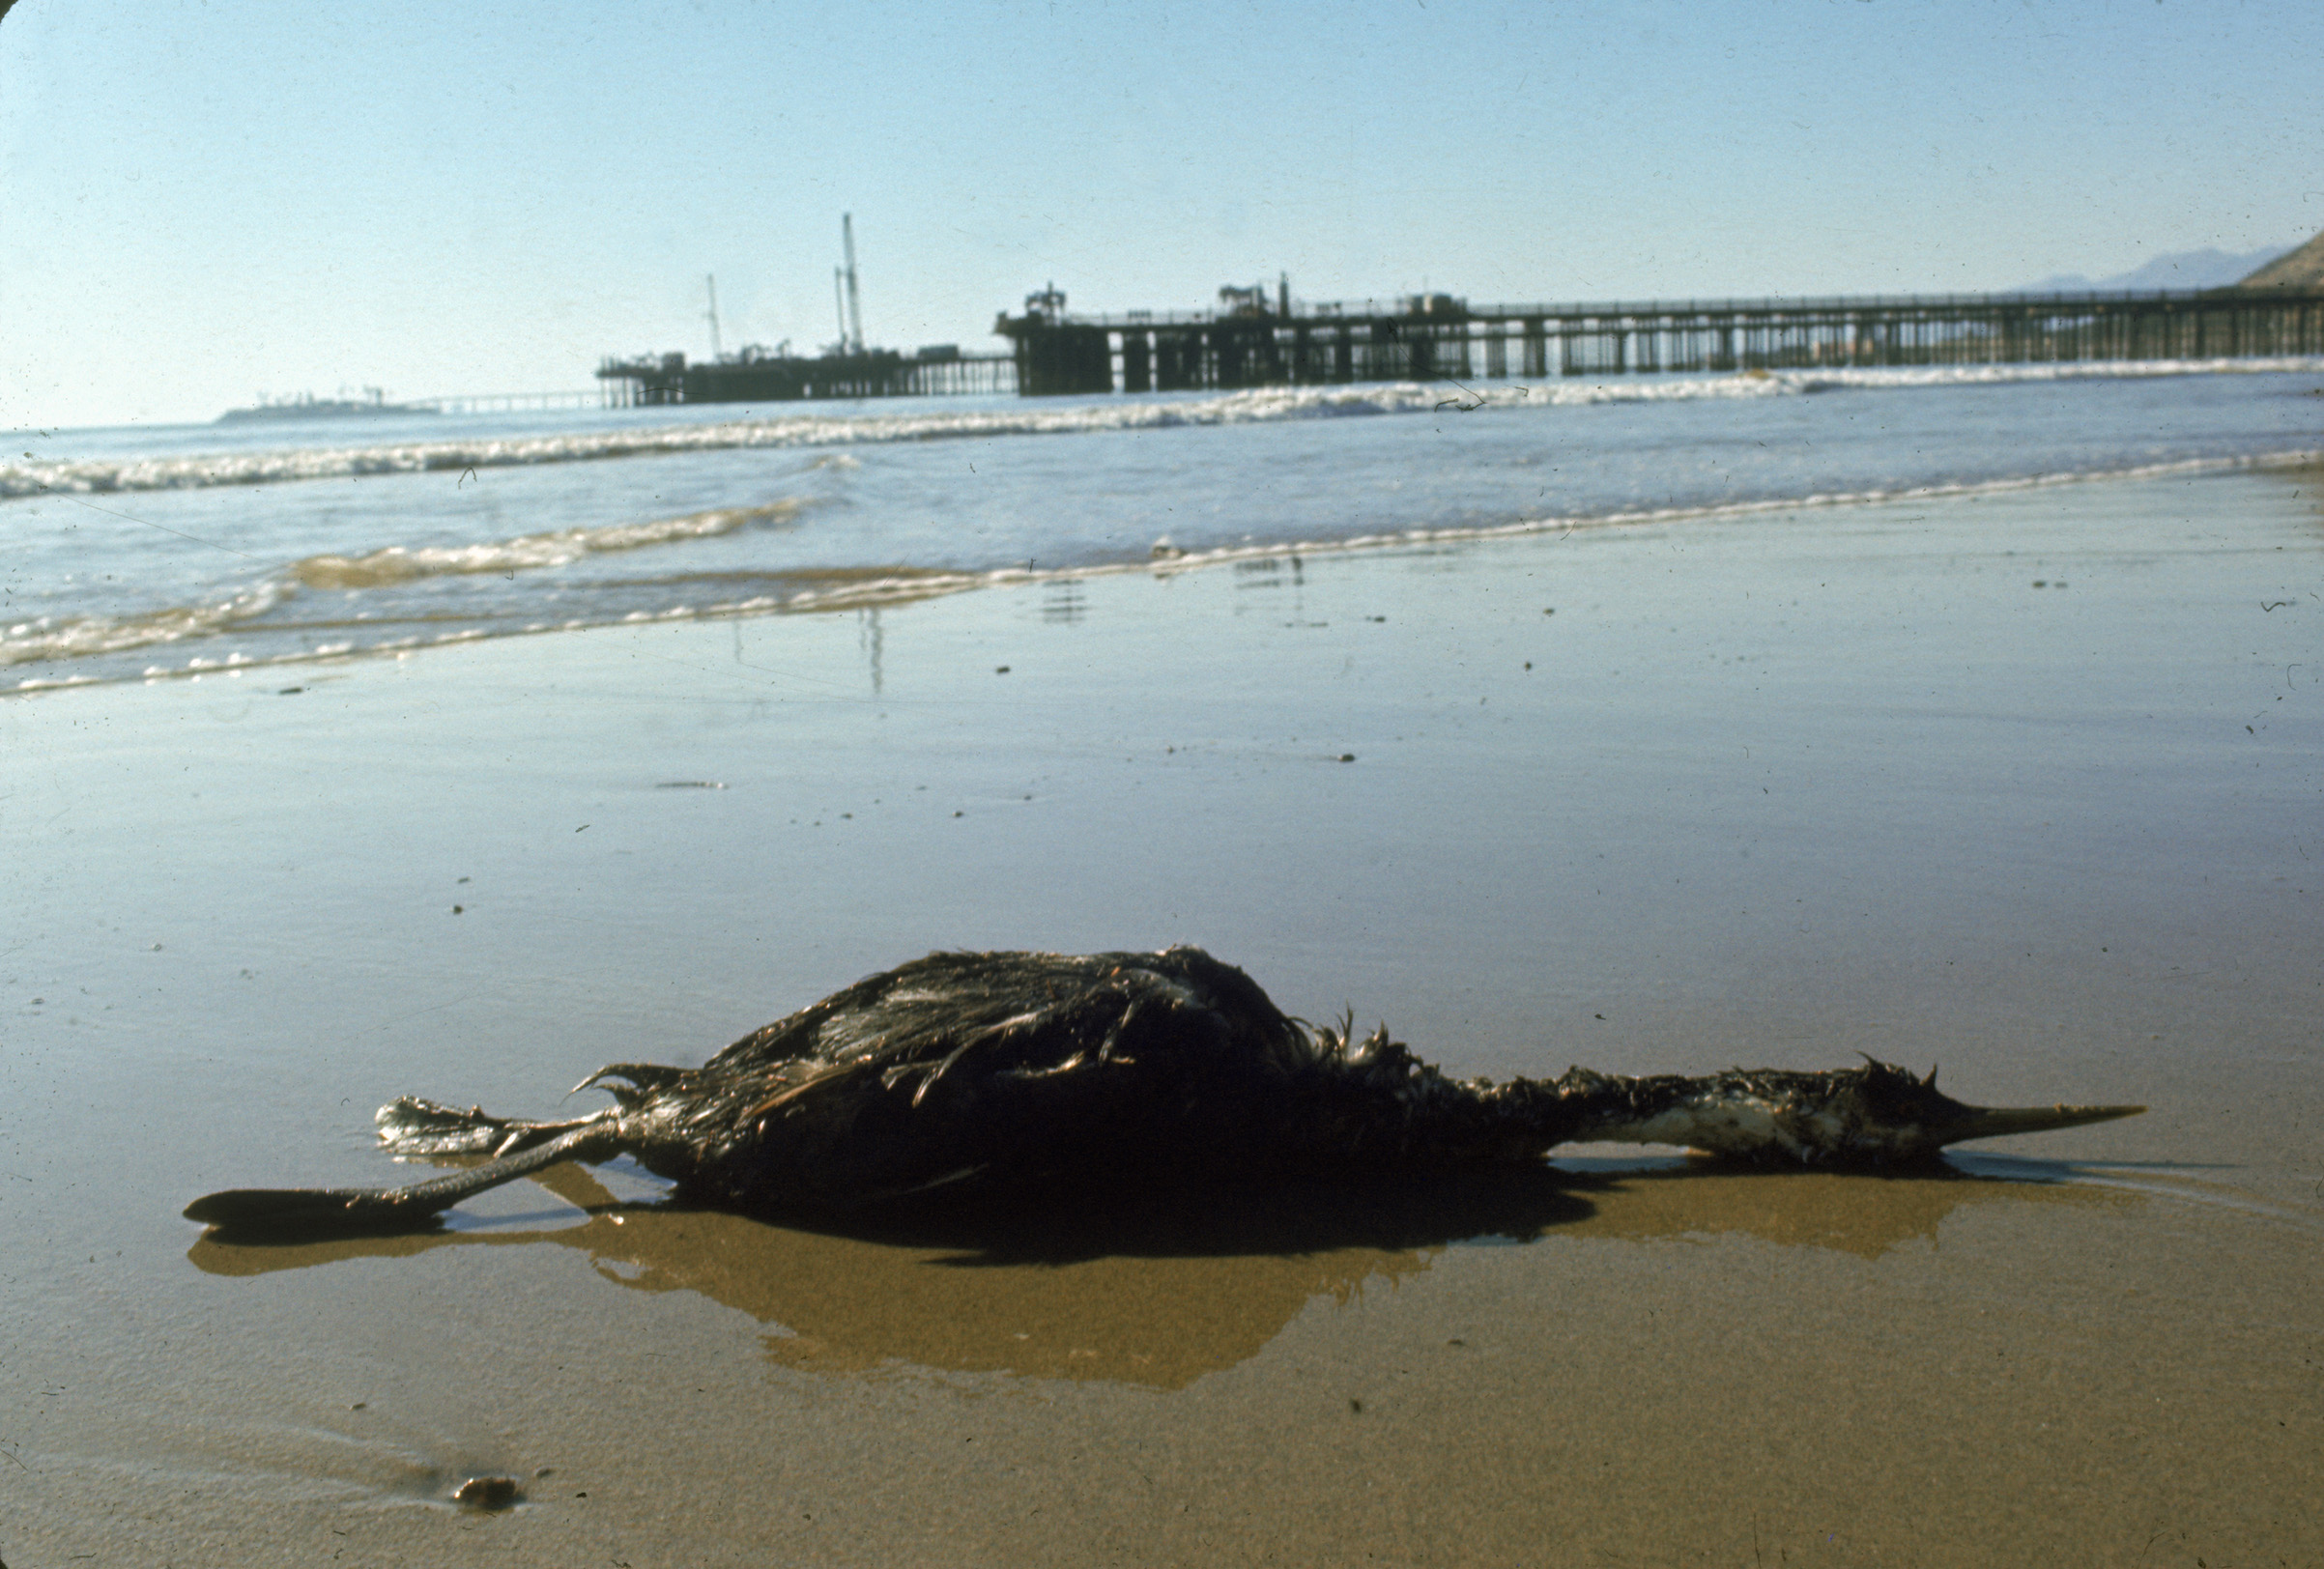 A seabird dead from oil slick, near Santa Barbara, Calif., in February 1969 (Vernon Merritt—The LIFE Picture Collection / Getty Images)